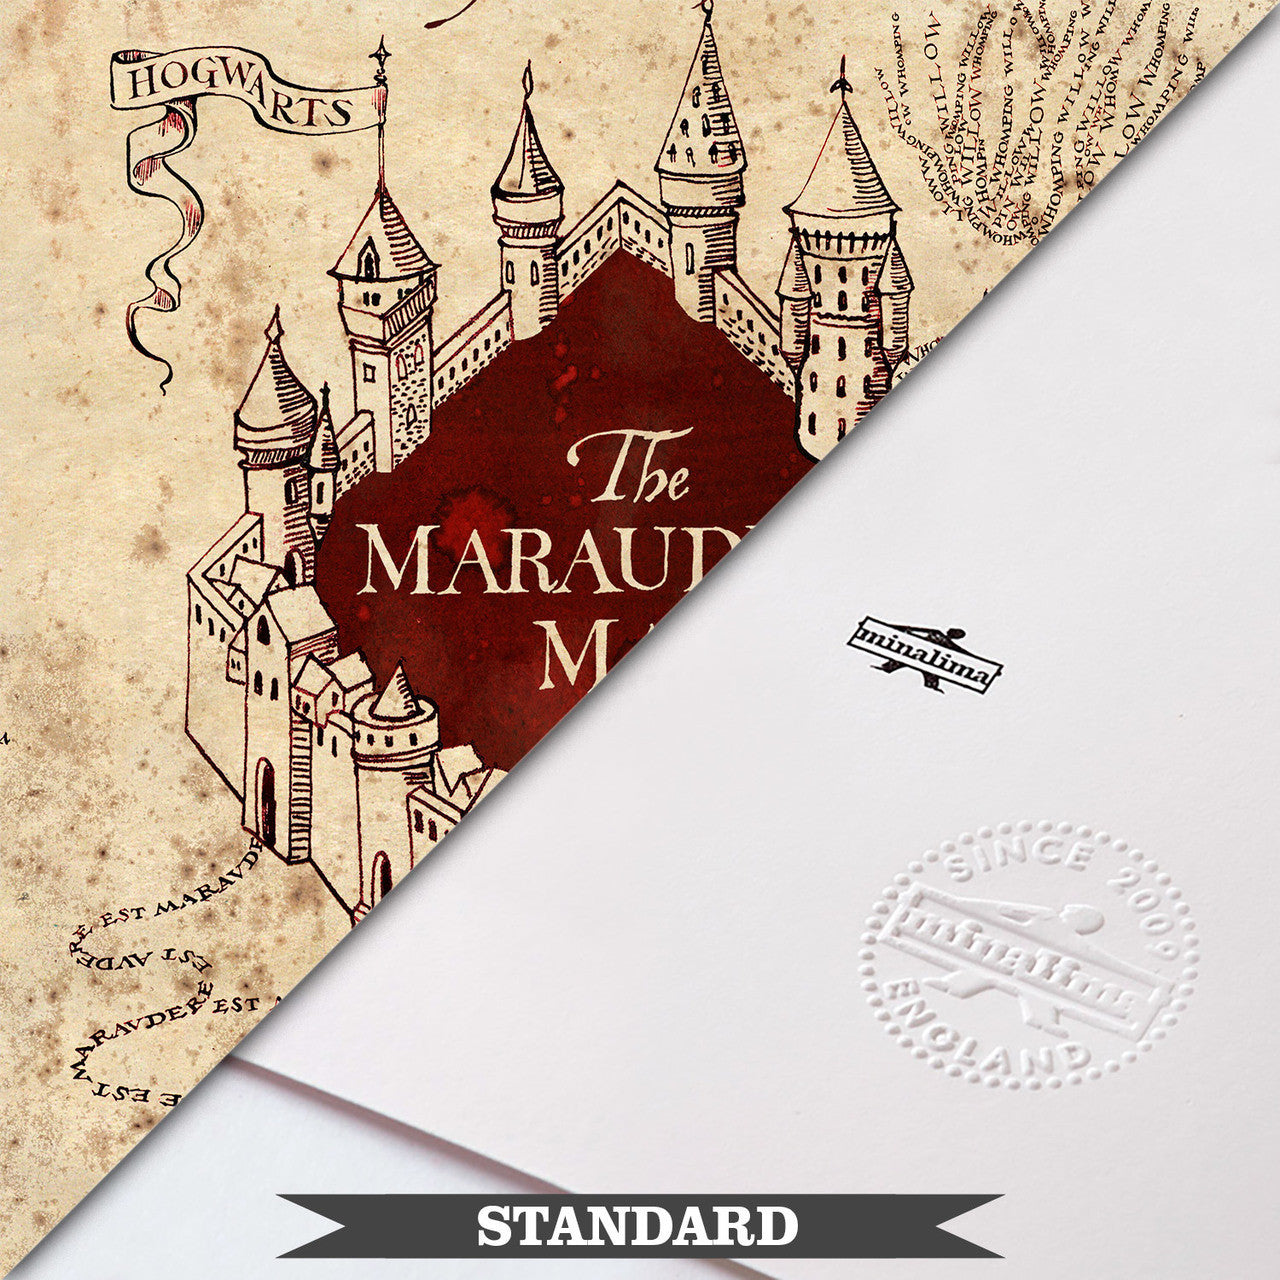 The Marauder's Map Limited Edition Art Print